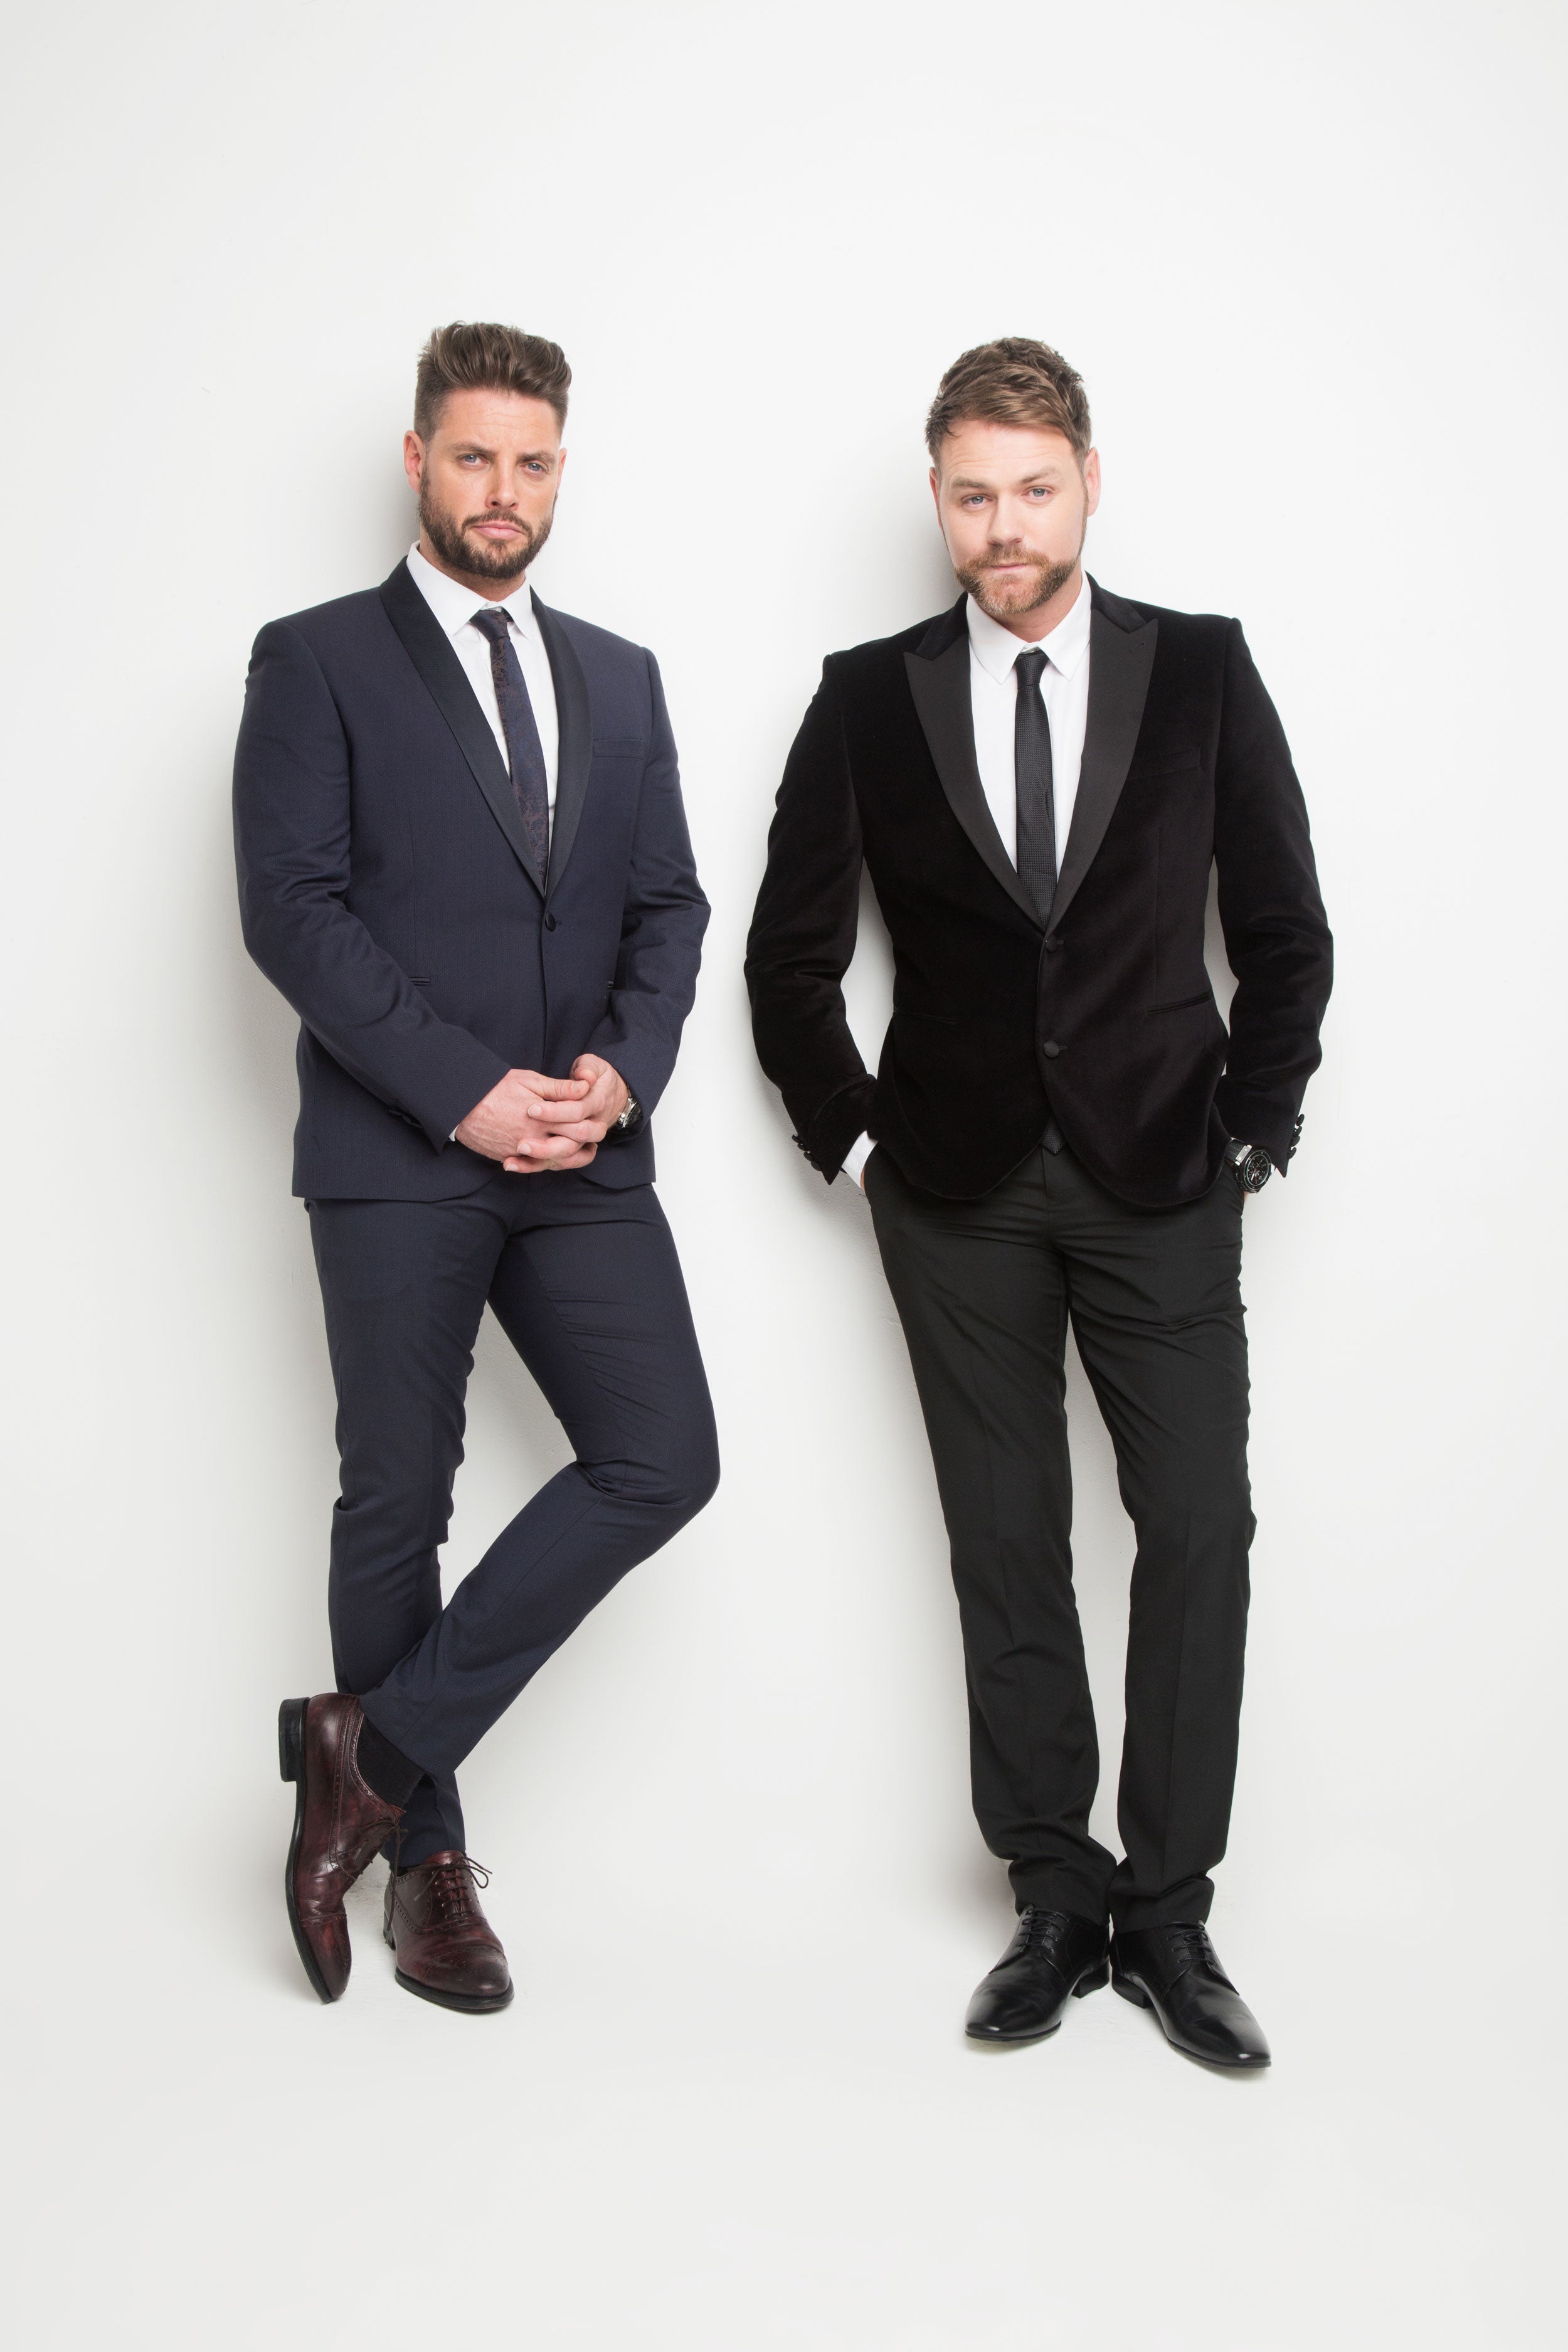 updated presale password for Boyzlife Featuring Keith Duffy & Brian McFadden tickets in London at Indigo At The O2